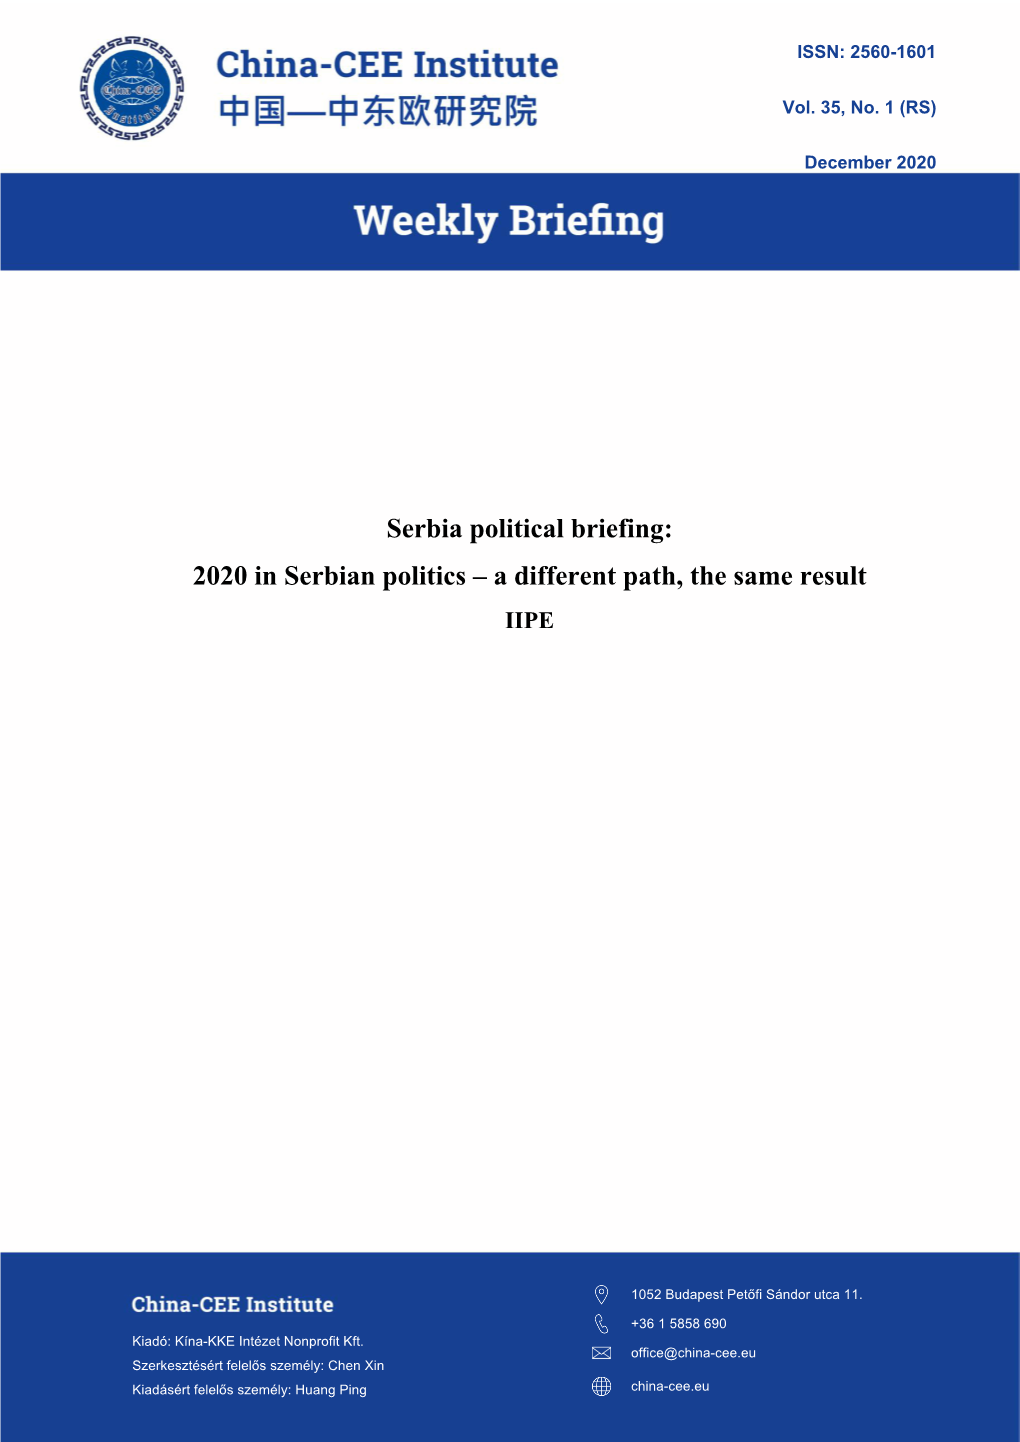 Serbia Political Briefing: 2020 in Serbian Politics – a Different Path, the Same Result IIPE